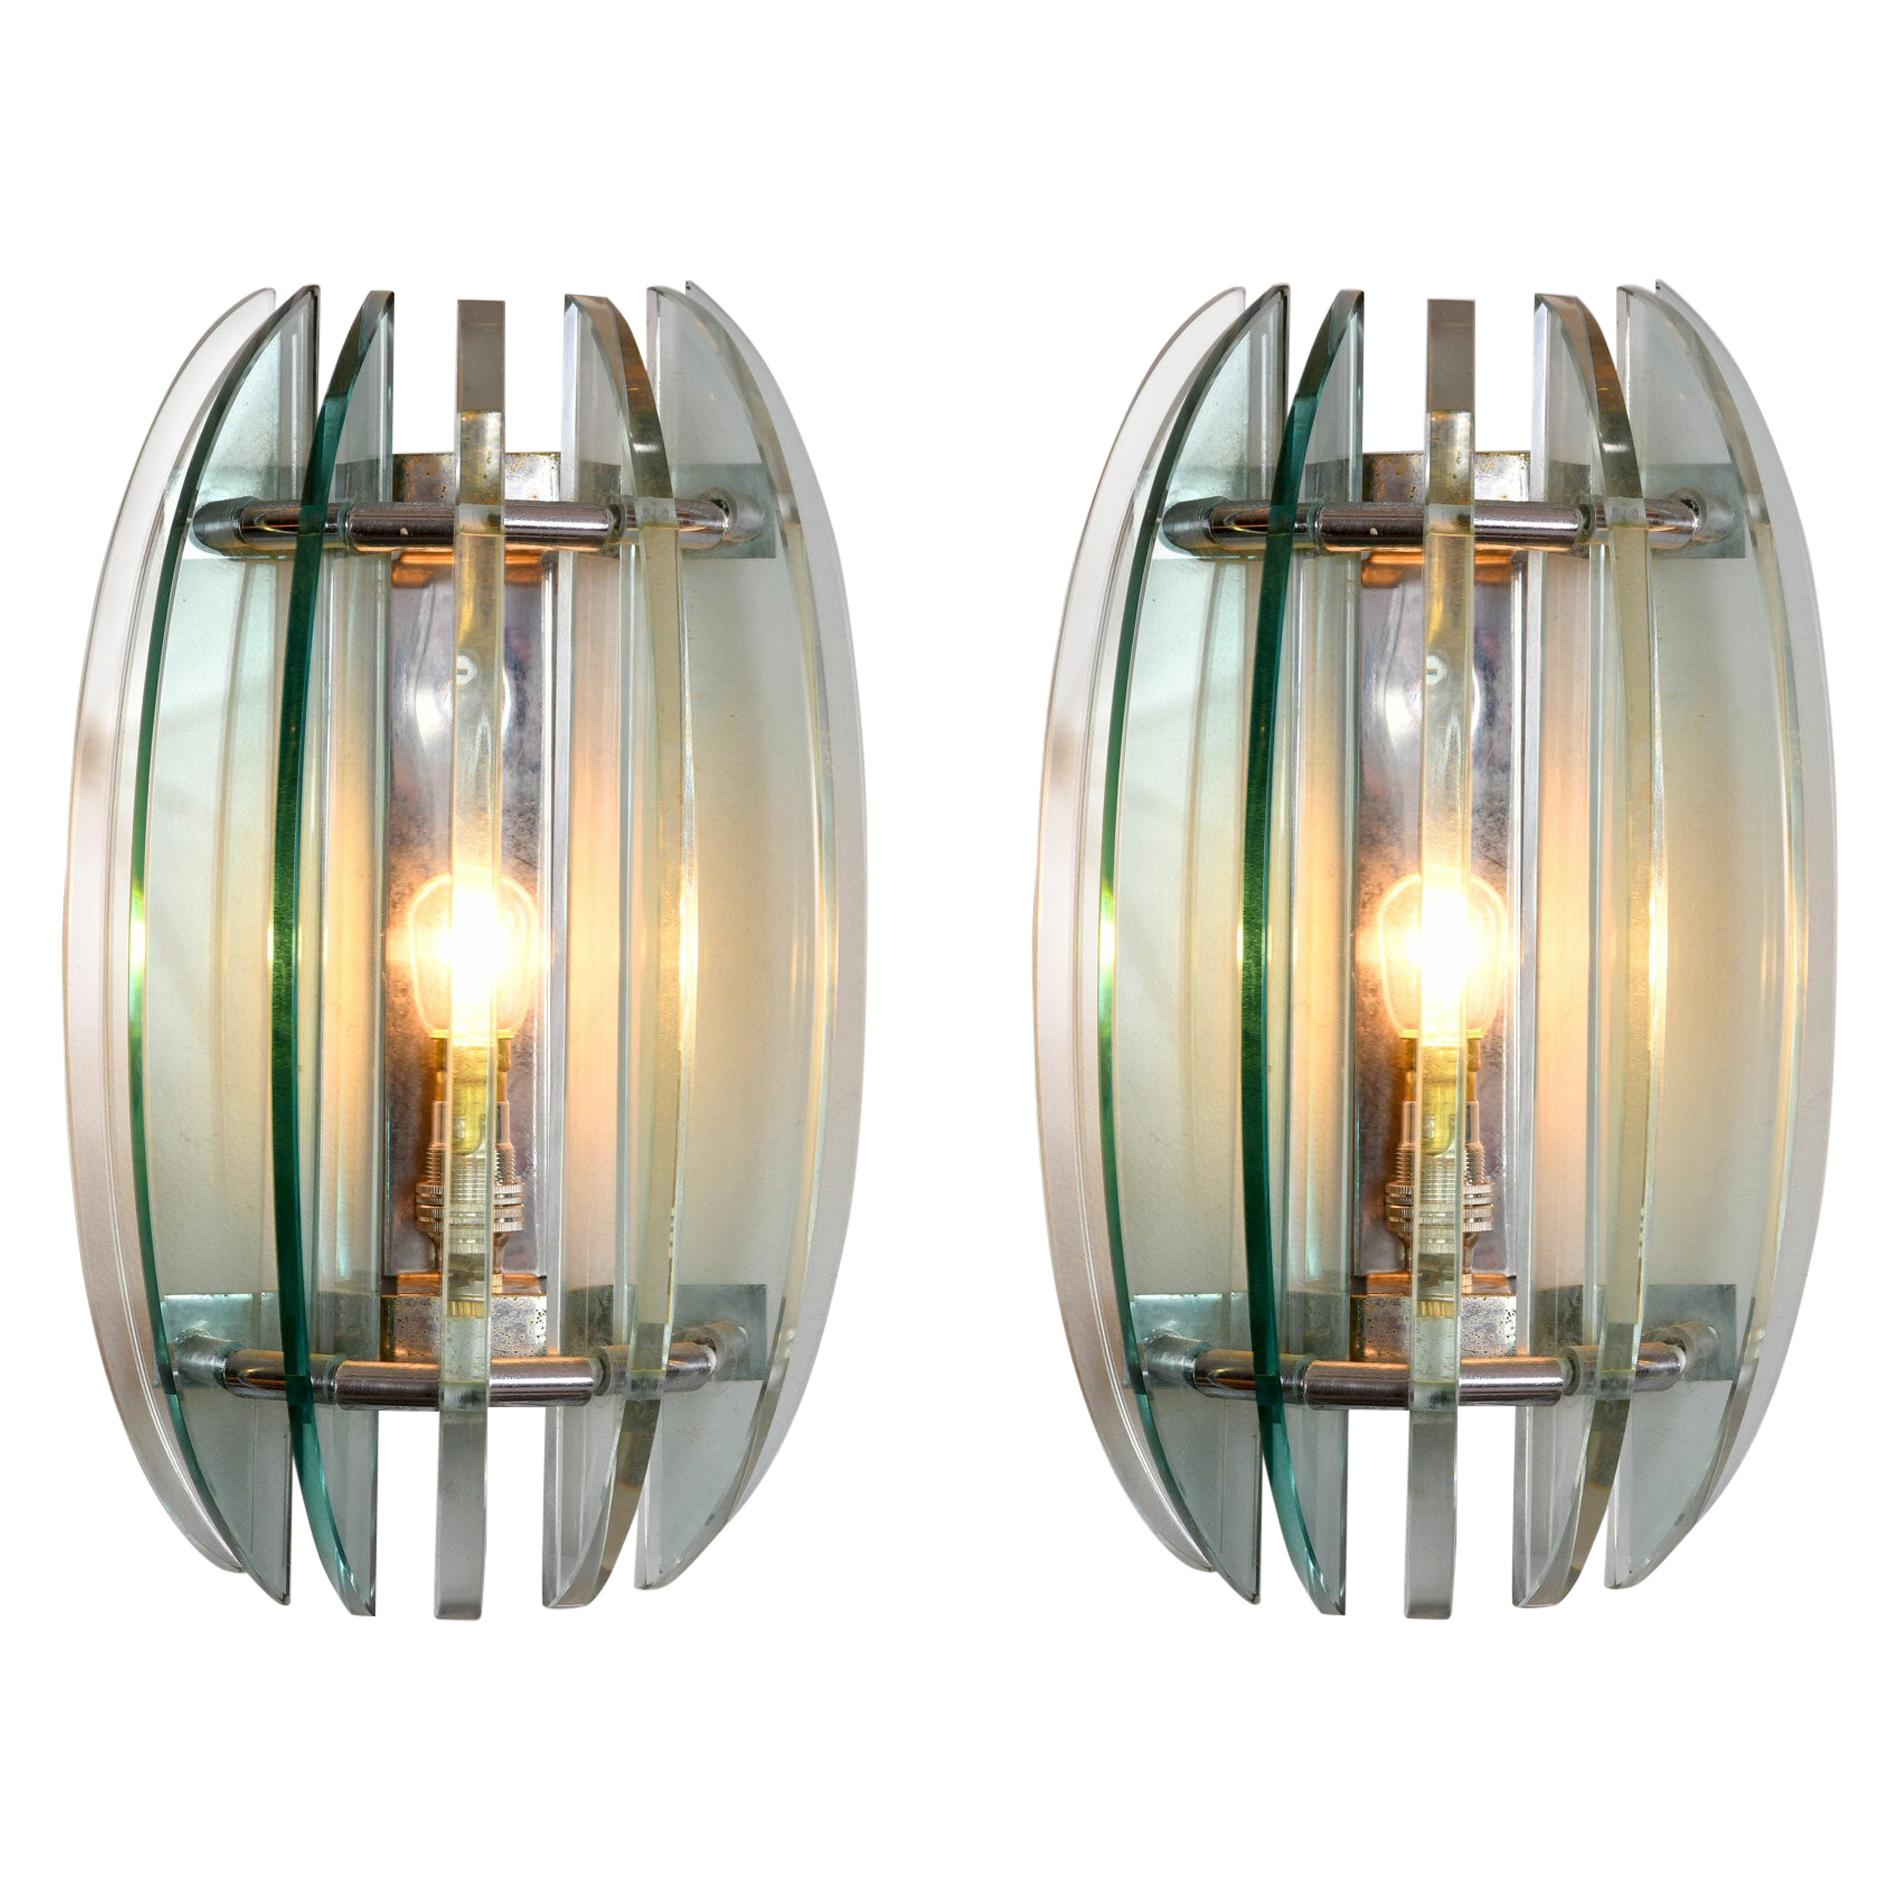 Pair of 1970s Italian Chrome and Glass Wall Lights by Veca